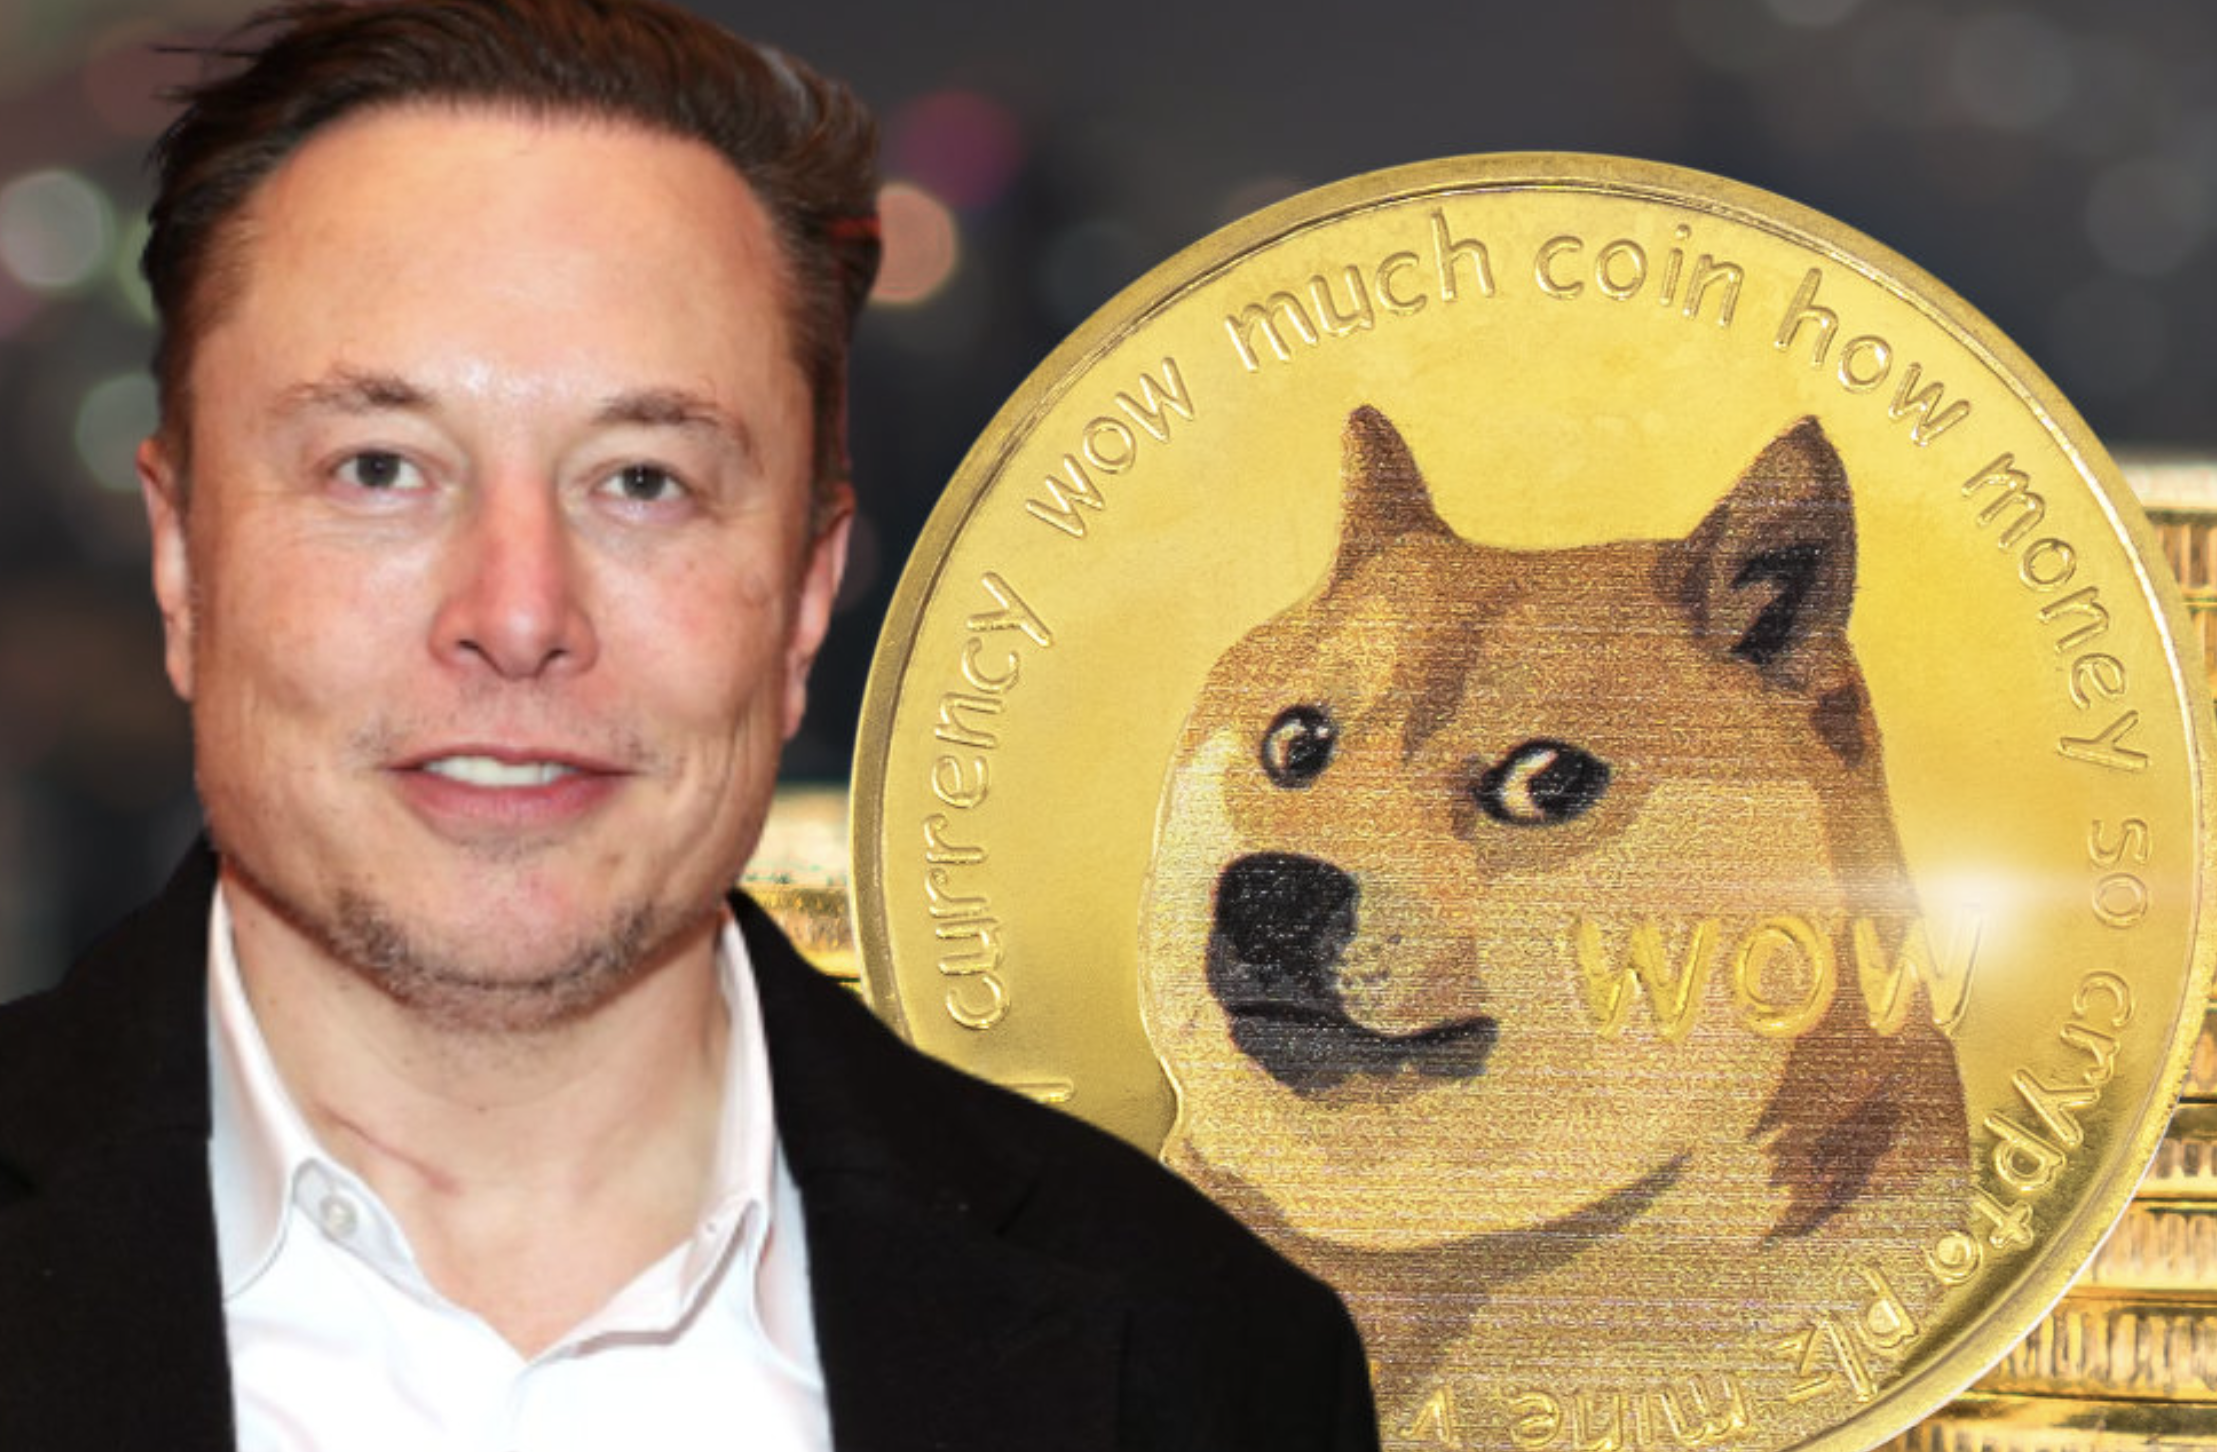 Elon Musk Unphased By $258 Billion Dogecoin Lawsuit – How Will Price React?